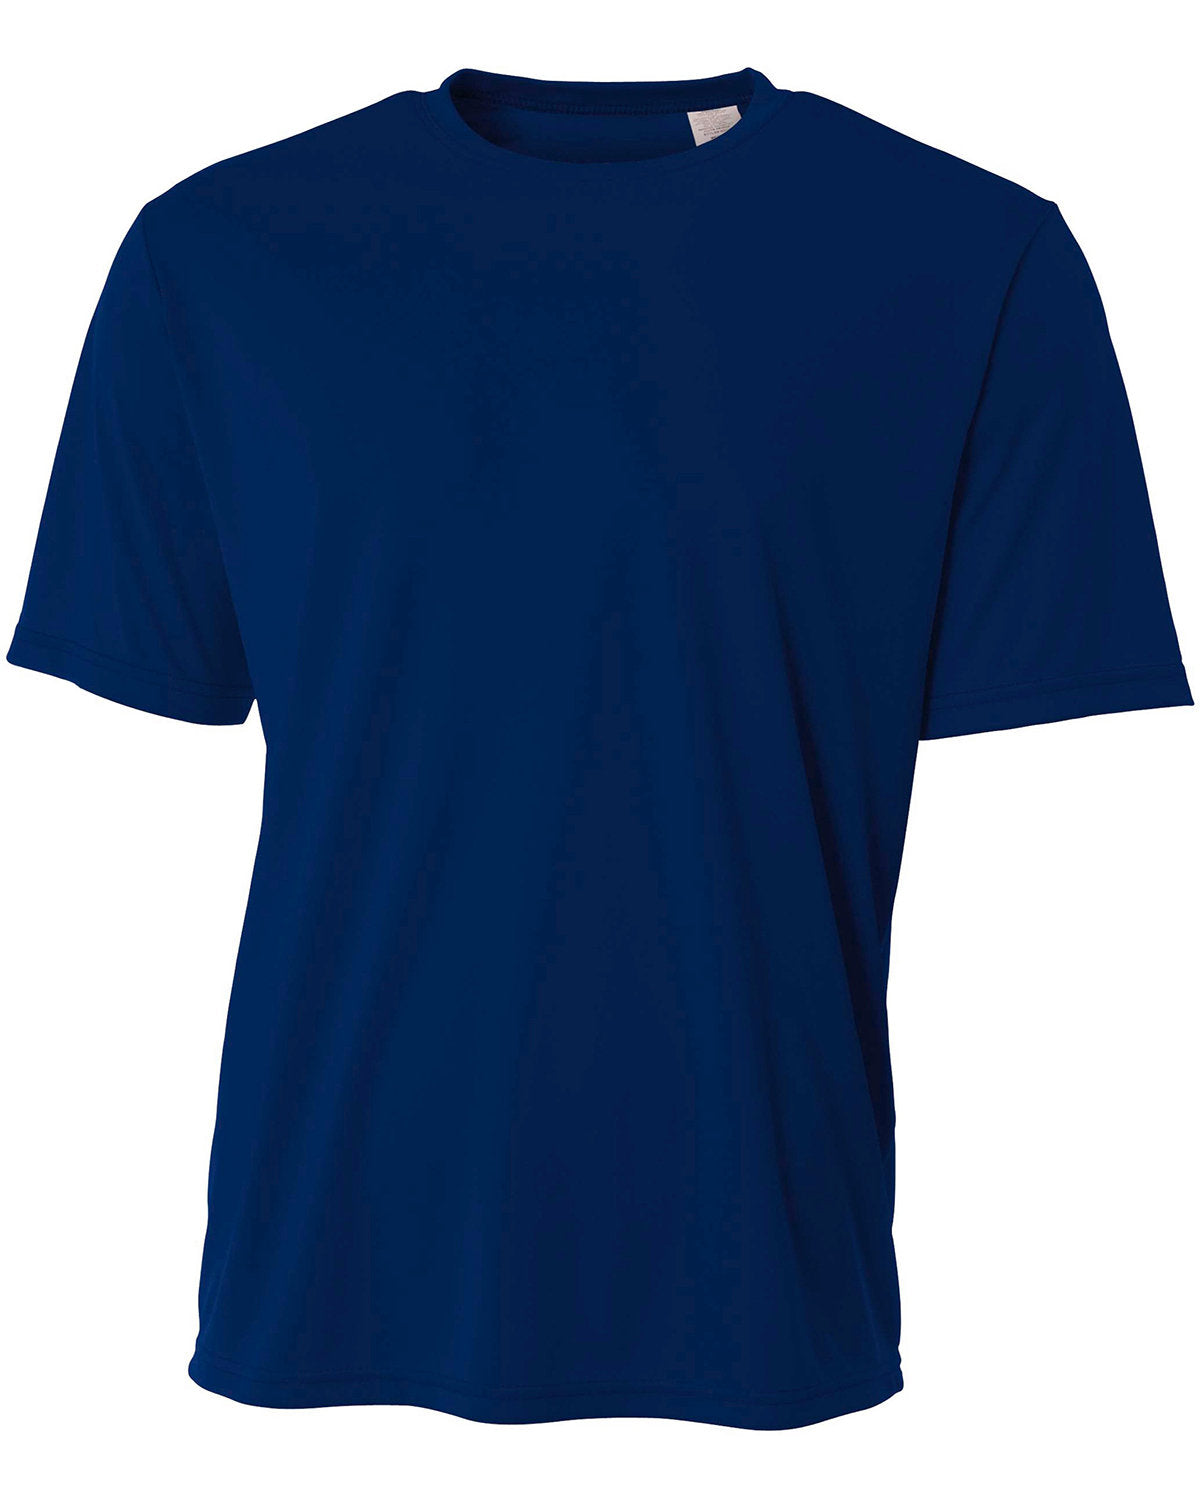 A4 Men's Sprint Performance T-Shirt: Speed and Comfort Combined